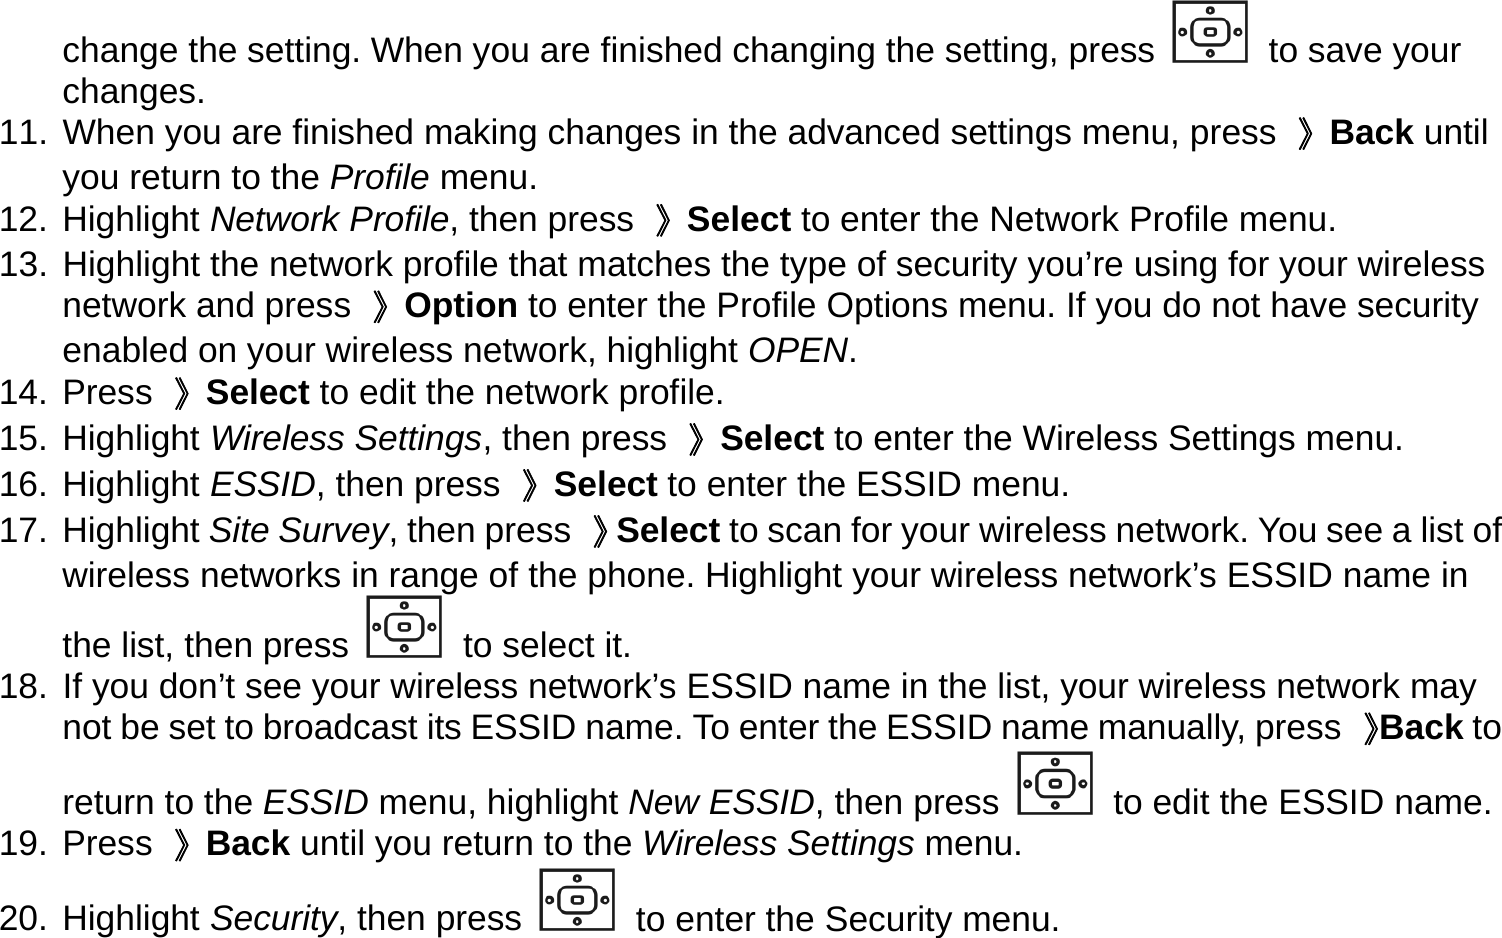 change the setting. When you are finished changing the setting, press   to save your changes. 11. When you are finished making changes in the advanced settings menu, press  》Back until you return to the Profile menu. 12. Highlight Network Profile, then press  》Select to enter the Network Profile menu. 13. Highlight the network profile that matches the type of security you’re using for your wireless network and press  》Option to enter the Profile Options menu. If you do not have security enabled on your wireless network, highlight OPEN.  14. Press 》Select to edit the network profile. 15. Highlight Wireless Settings, then press  》Select to enter the Wireless Settings menu. 16. Highlight ESSID, then press  》Select to enter the ESSID menu. 17. Highlight Site Survey, then press  》Select to scan for your wireless network. You see a list of wireless networks in range of the phone. Highlight your wireless network’s ESSID name in the list, then press   to select it.   18. If you don’t see your wireless network’s ESSID name in the list, your wireless network may not be set to broadcast its ESSID name. To enter the ESSID name manually, press  》Back to return to the ESSID menu, highlight New ESSID, then press   to edit the ESSID name. 19. Press 》Back until you return to the Wireless Settings menu. 20. Highlight Security, then press   to enter the Security menu. 